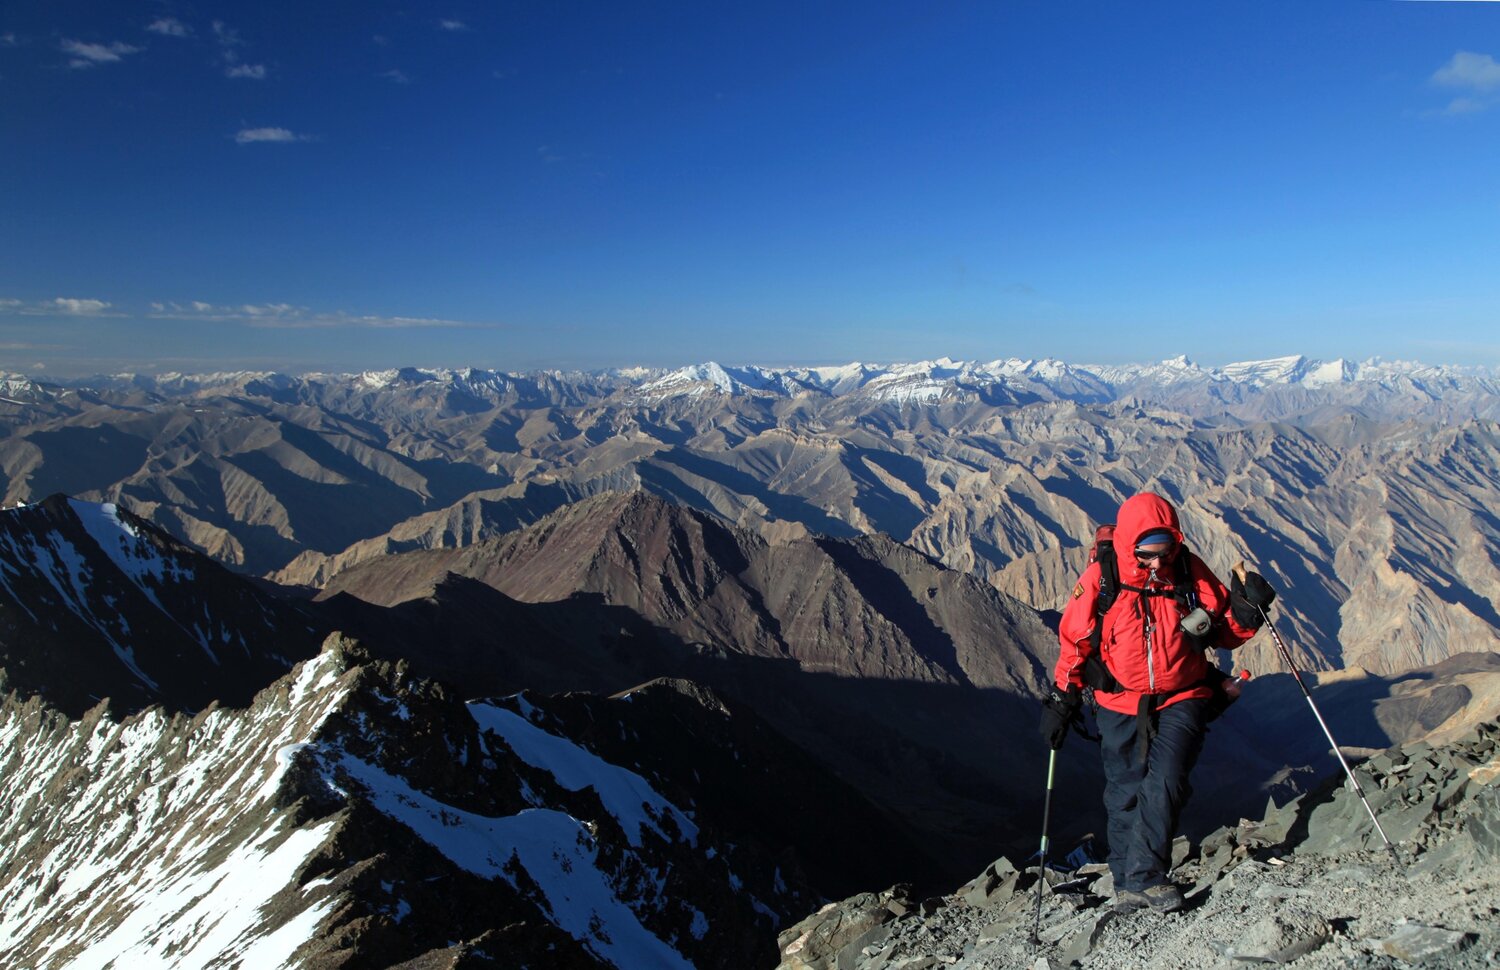 On the summit ridge of Stok Kangri (6,153 metres), one of the most popular non-technical mountaineering objectives in the region. The climb is achievable by most people with a reasonably good level of fitness and some experience of high altitude climbing or trekking.